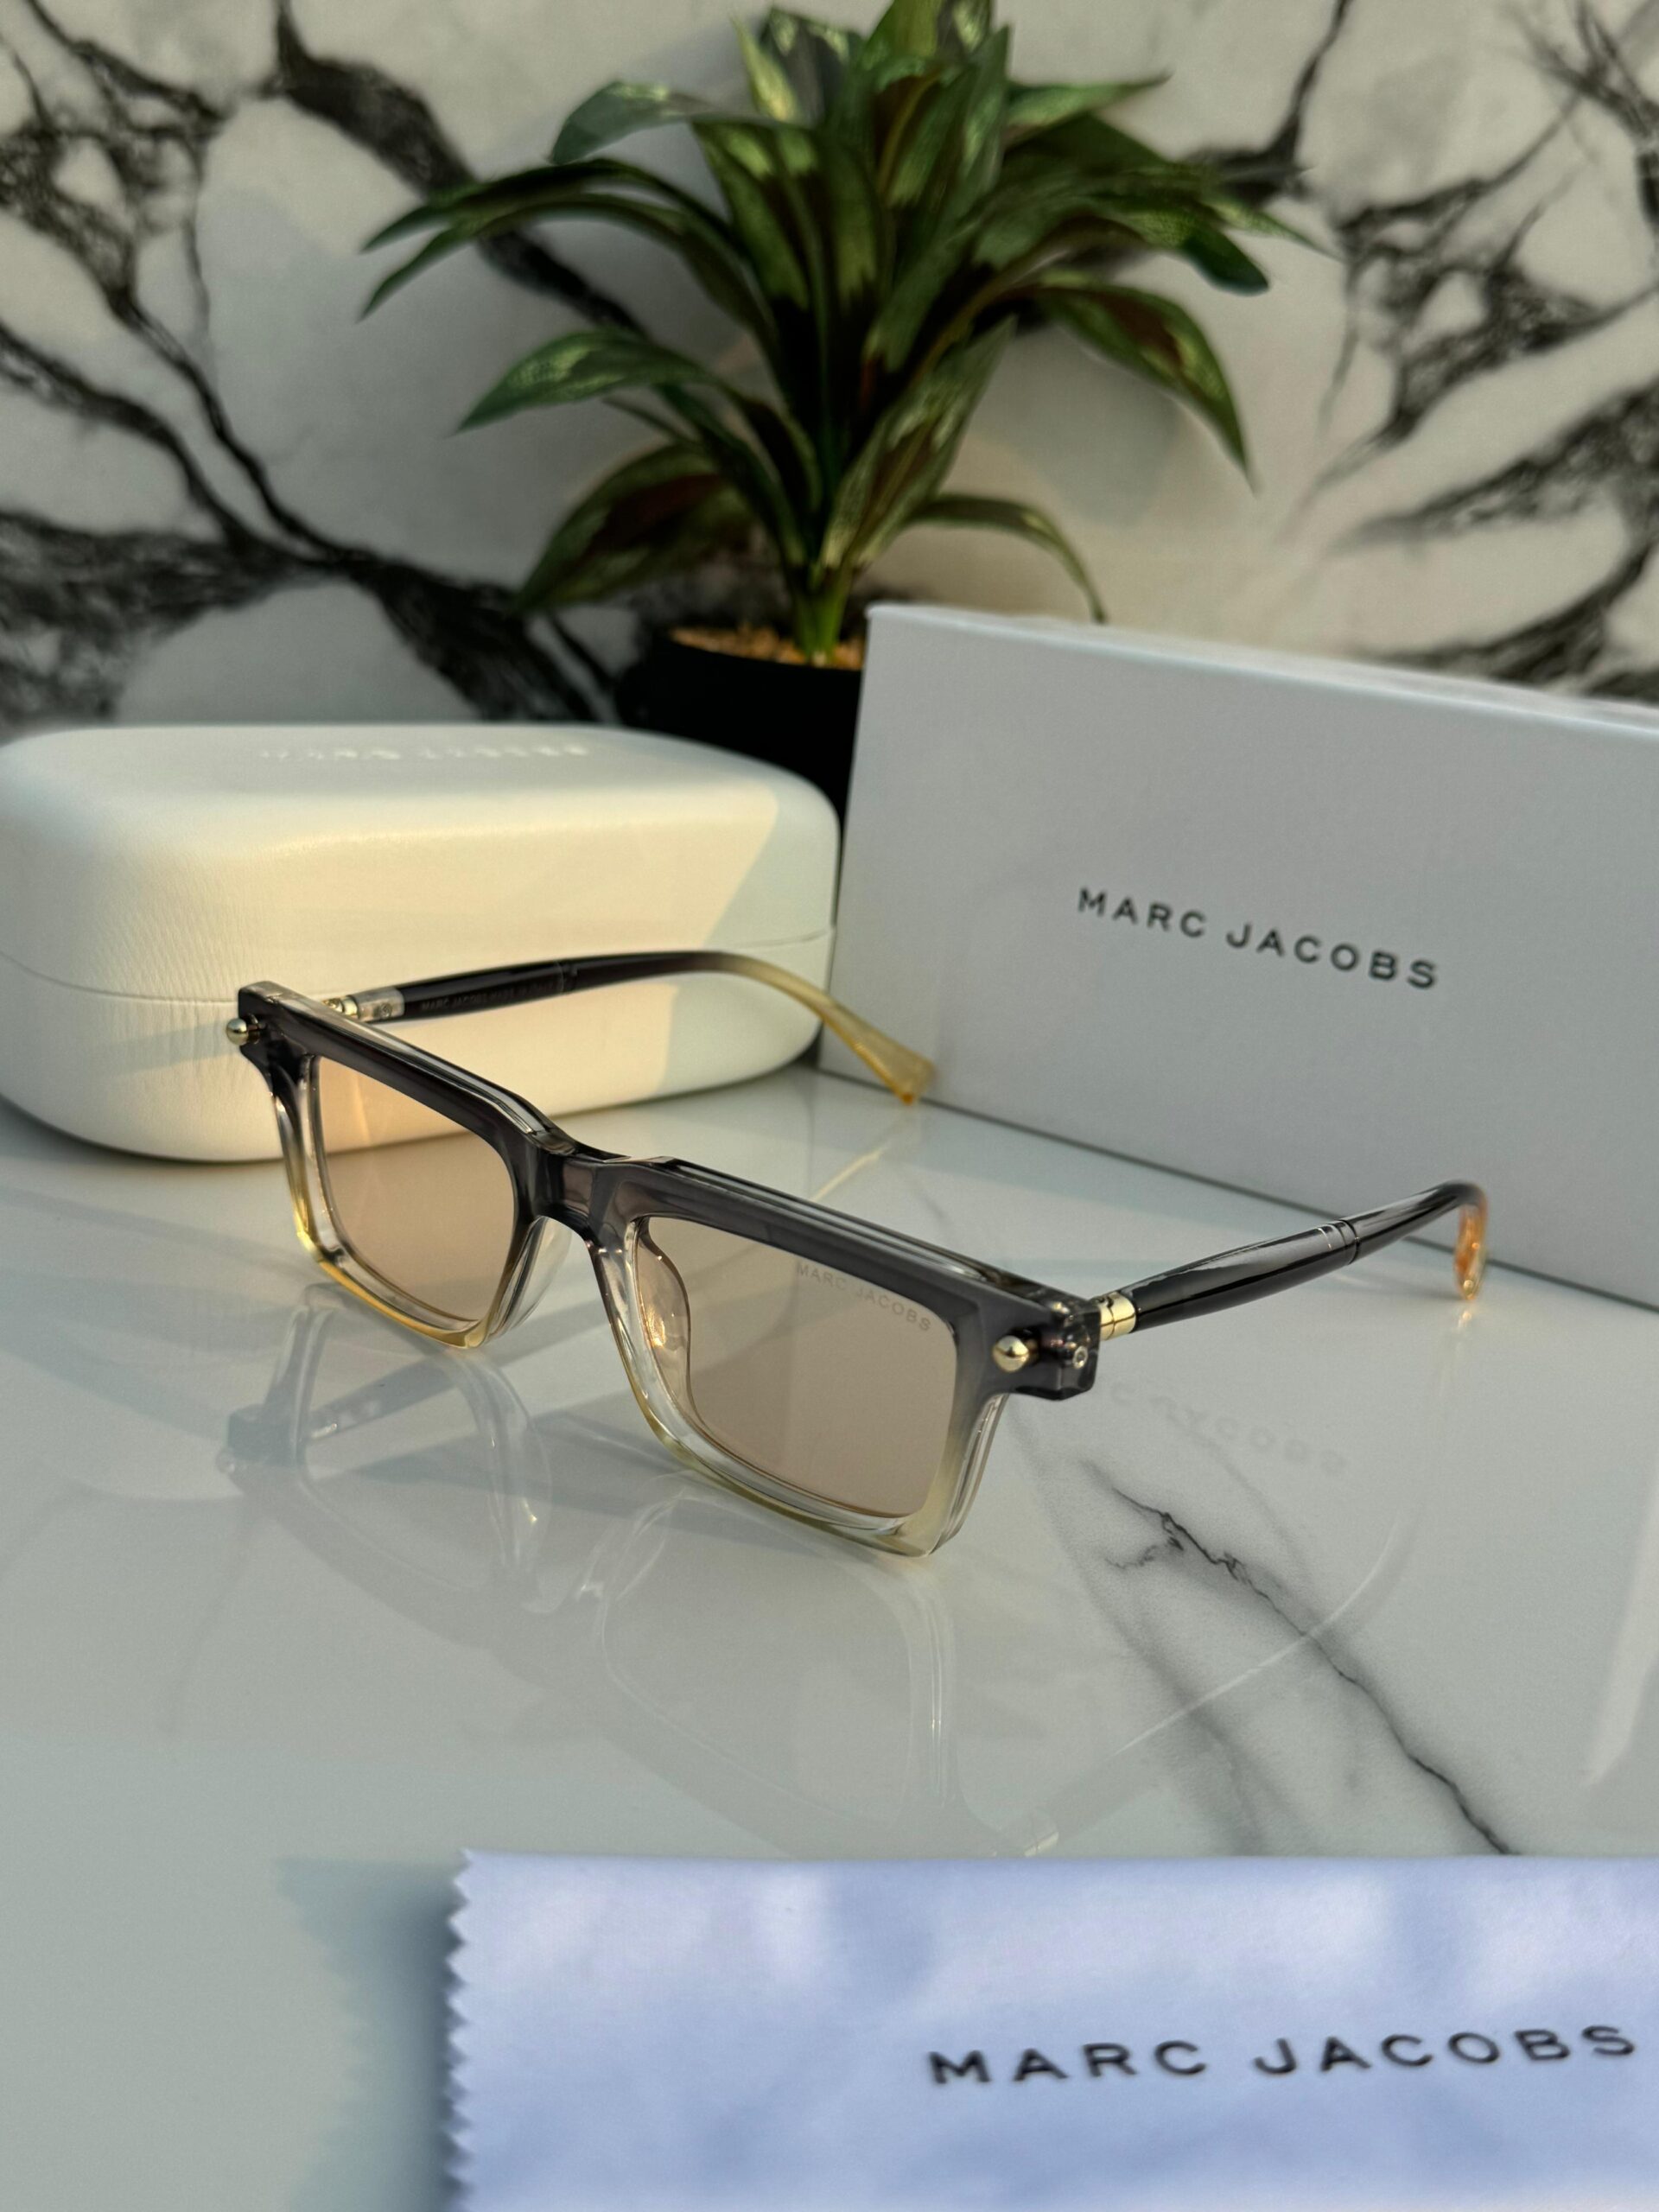 Marc Jacobs Goggles - South Indian Market